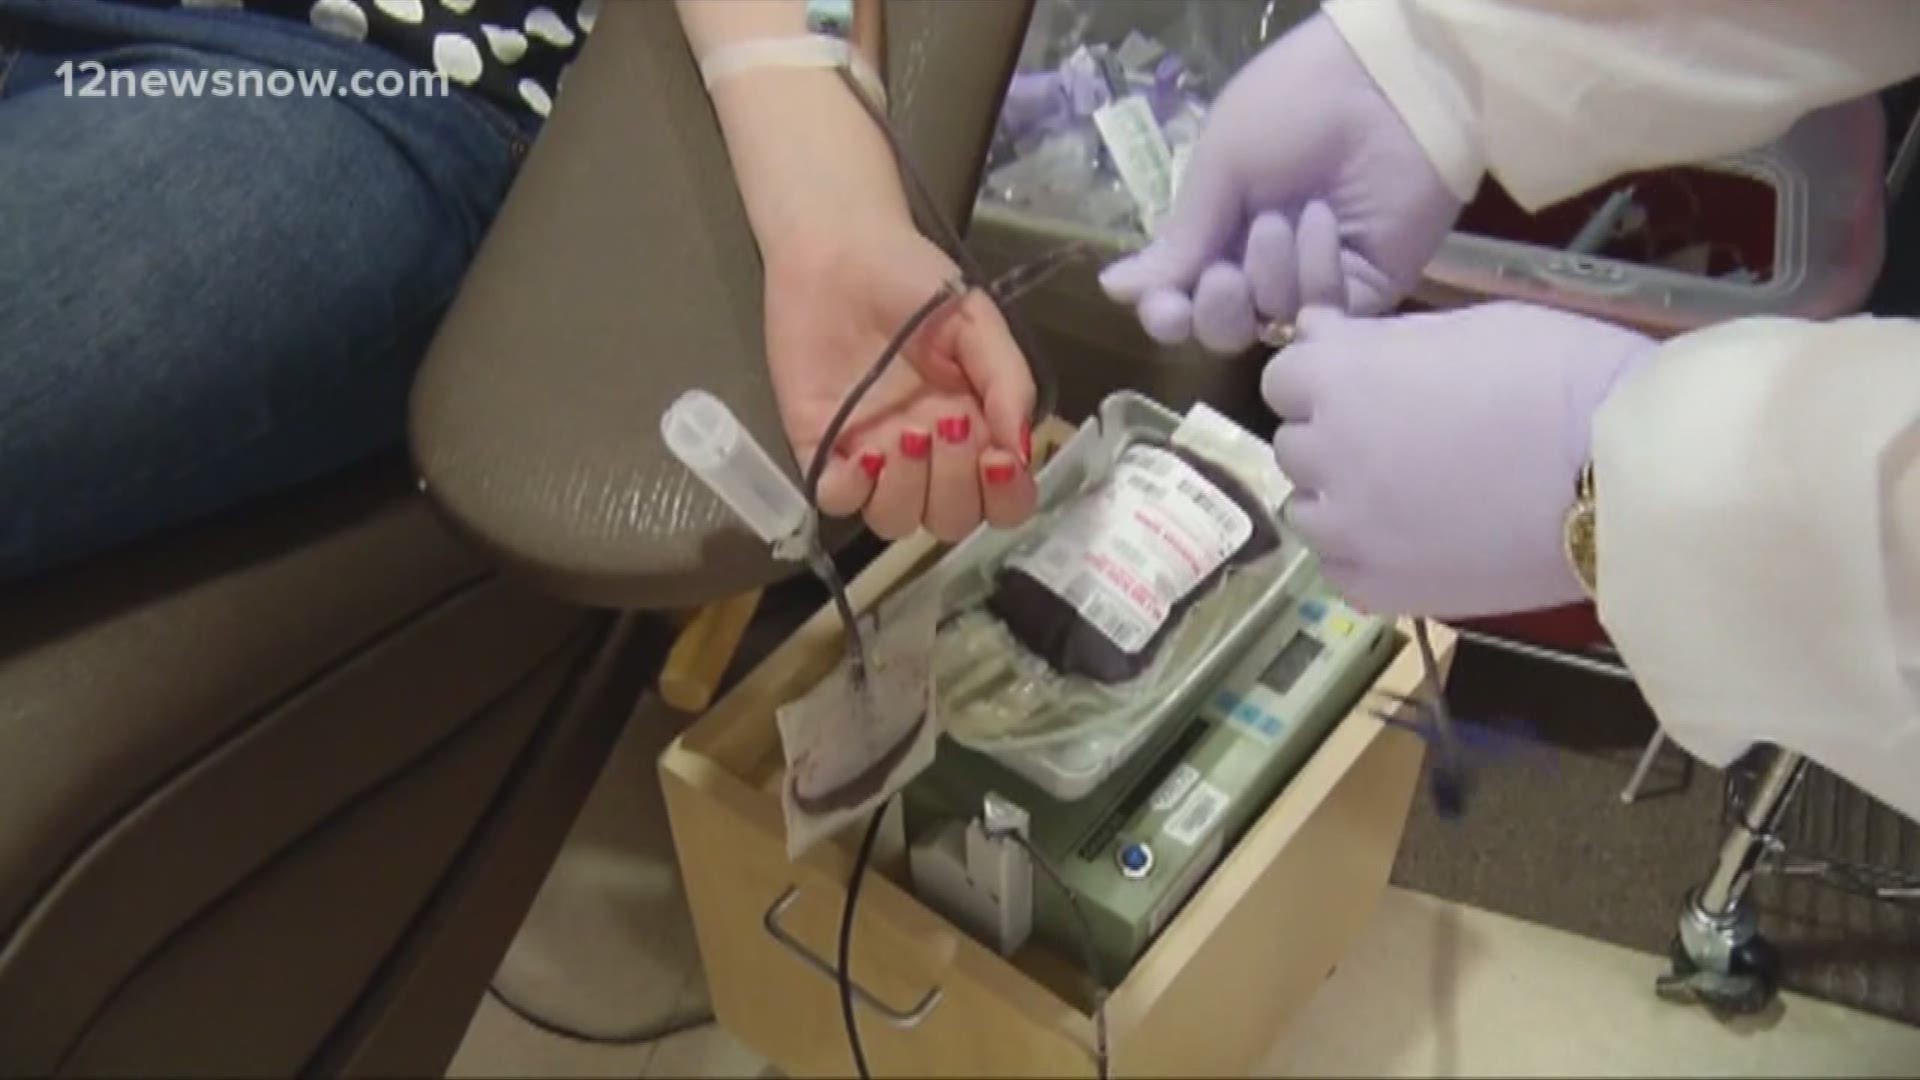 As COVID-19 cases continue to climb in Southeast Texas area hospitals are in desperate need of plasma from people who have recovered from the coronavirus.